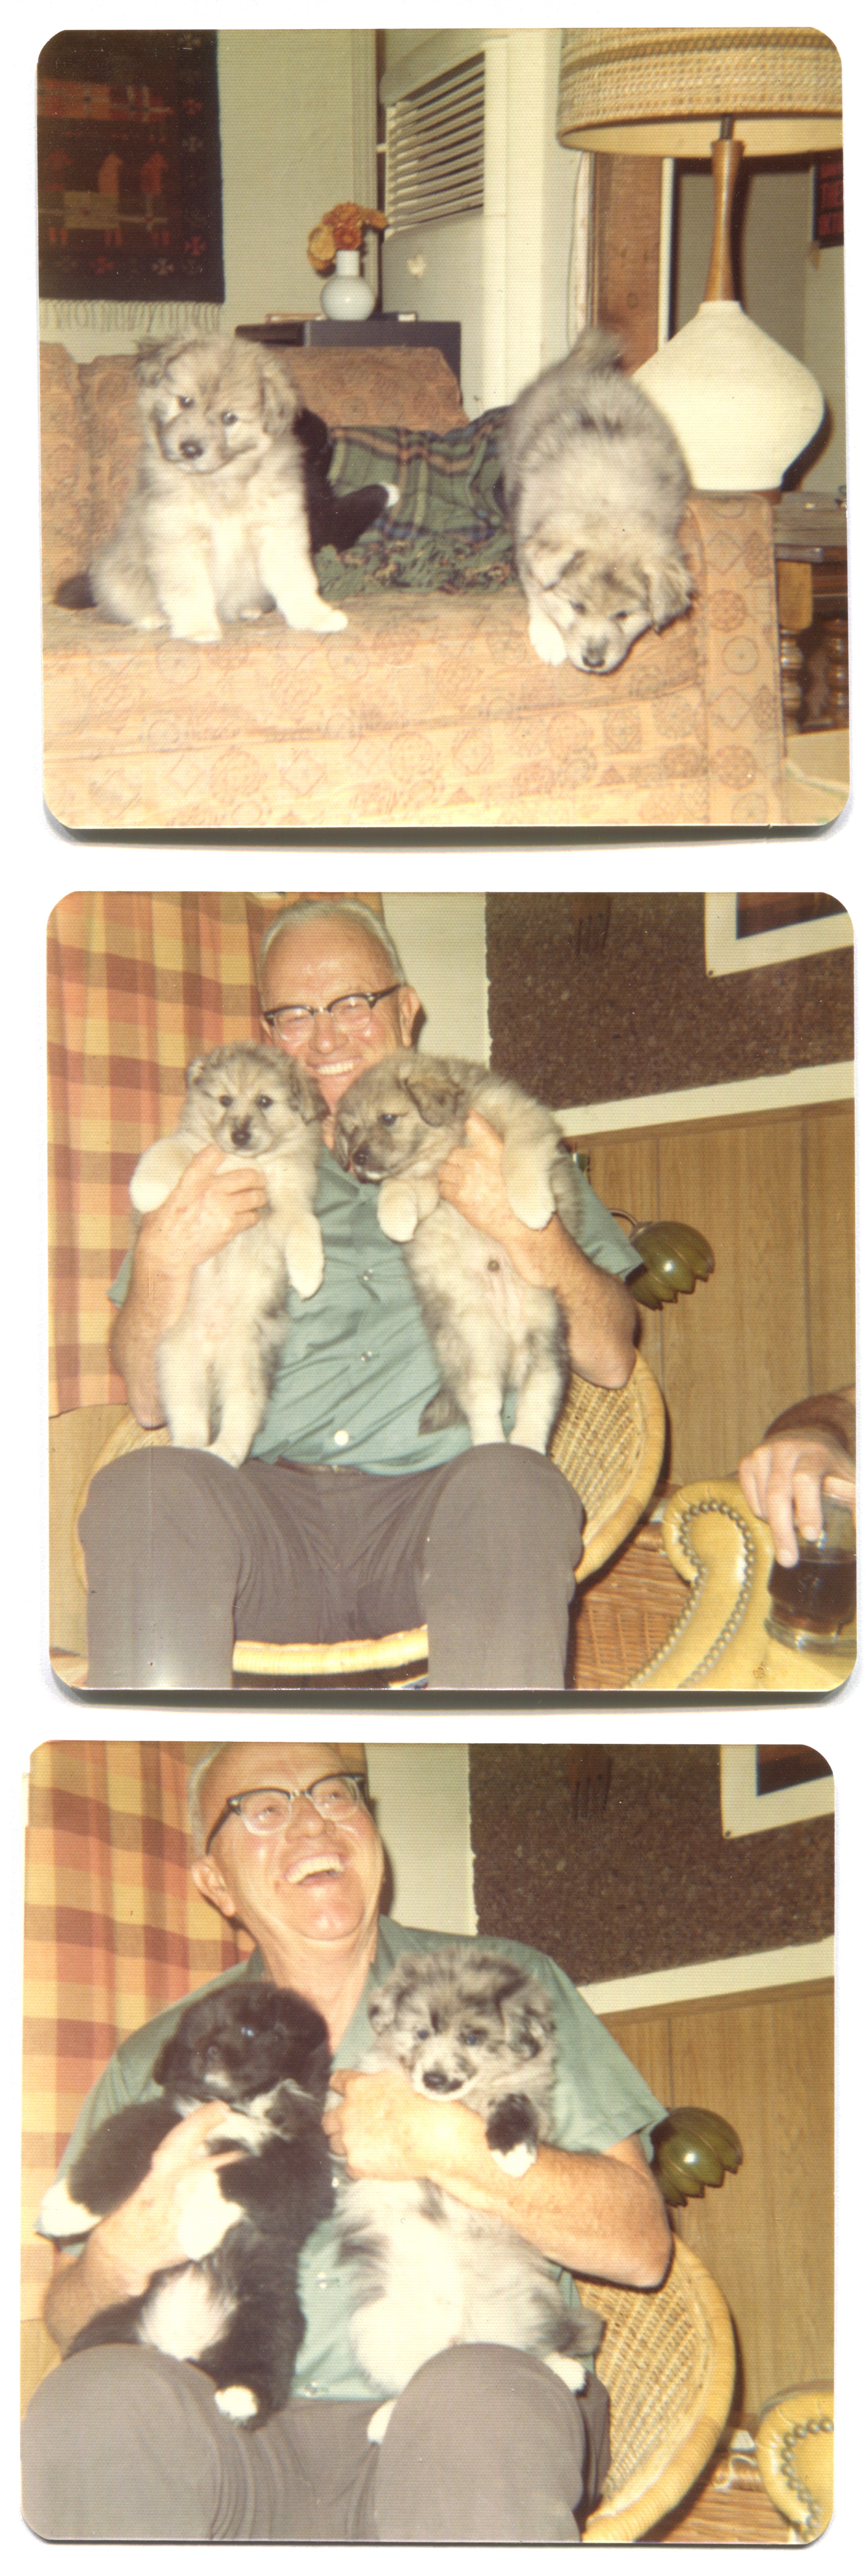 Man in 70s style clothing holding fluffy puppies